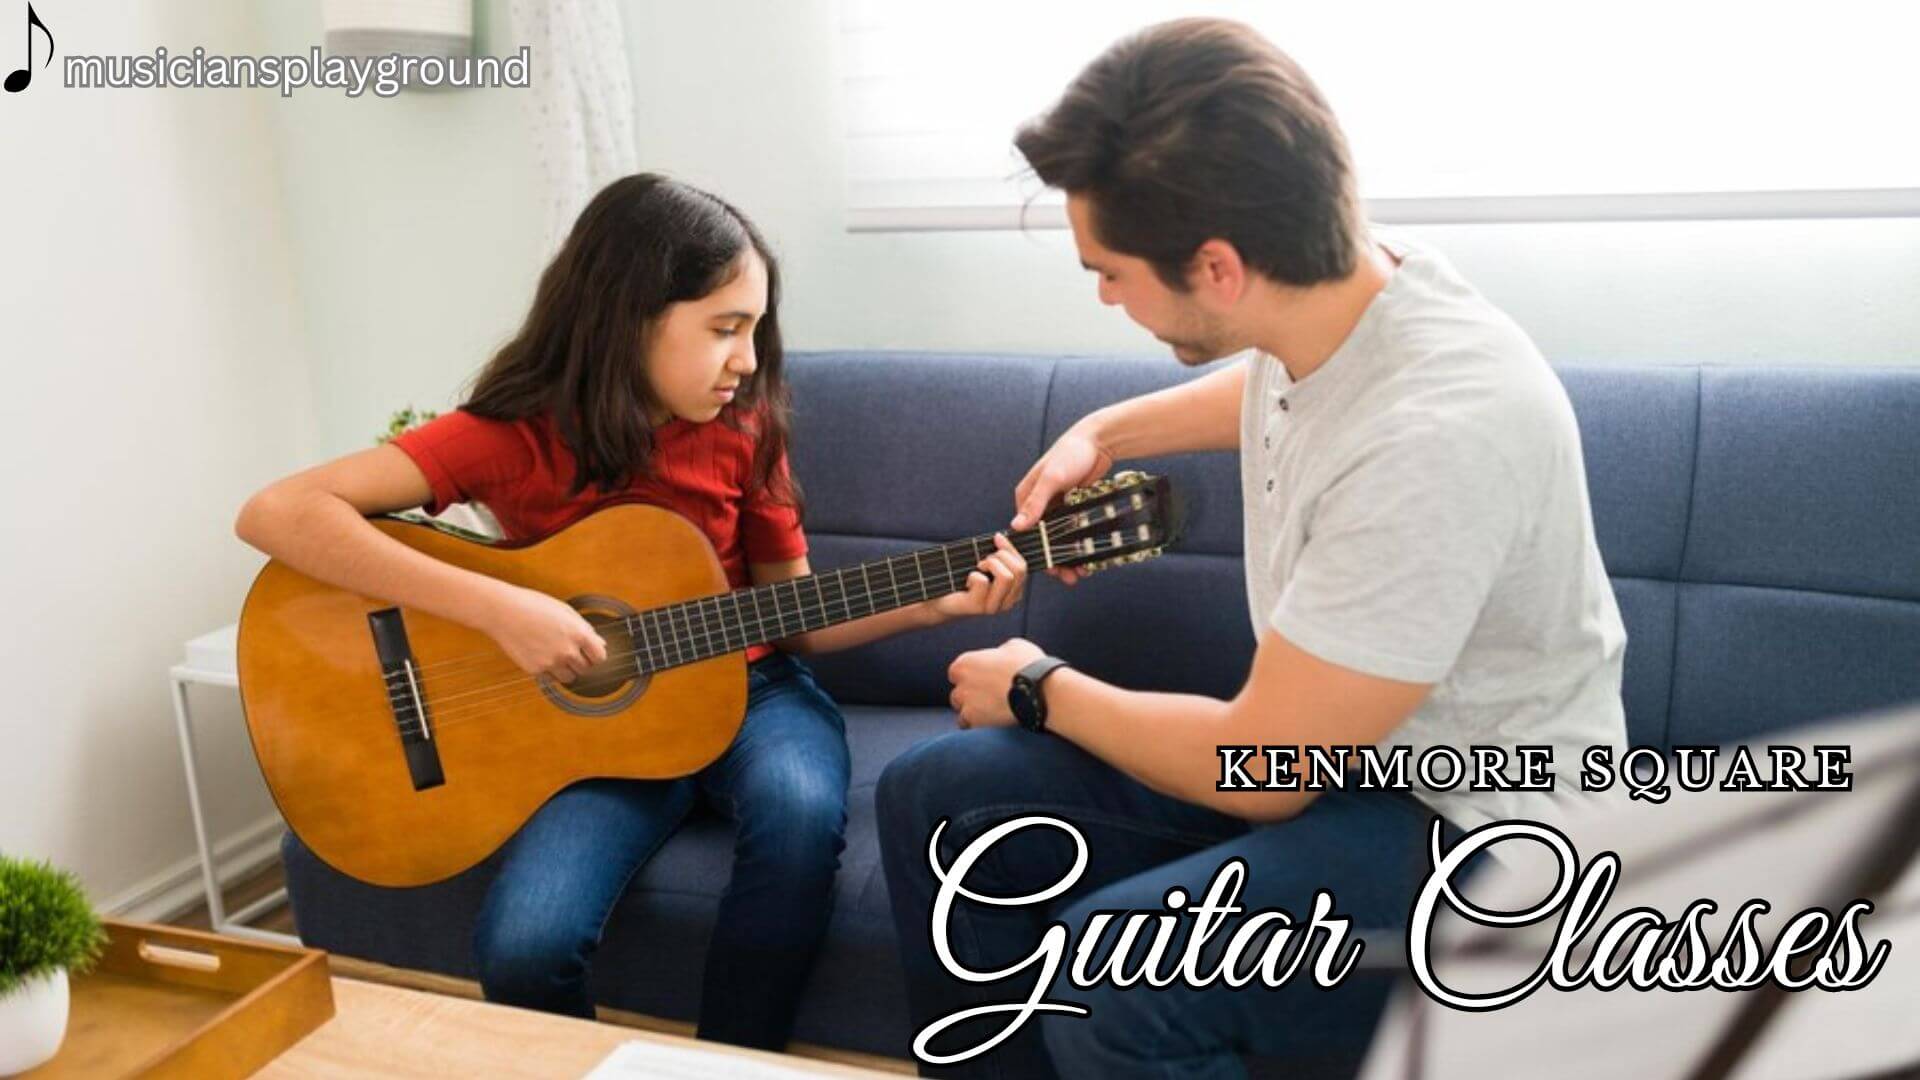 Welcome to Guitar Classes in Kenmore Square, Massachusetts